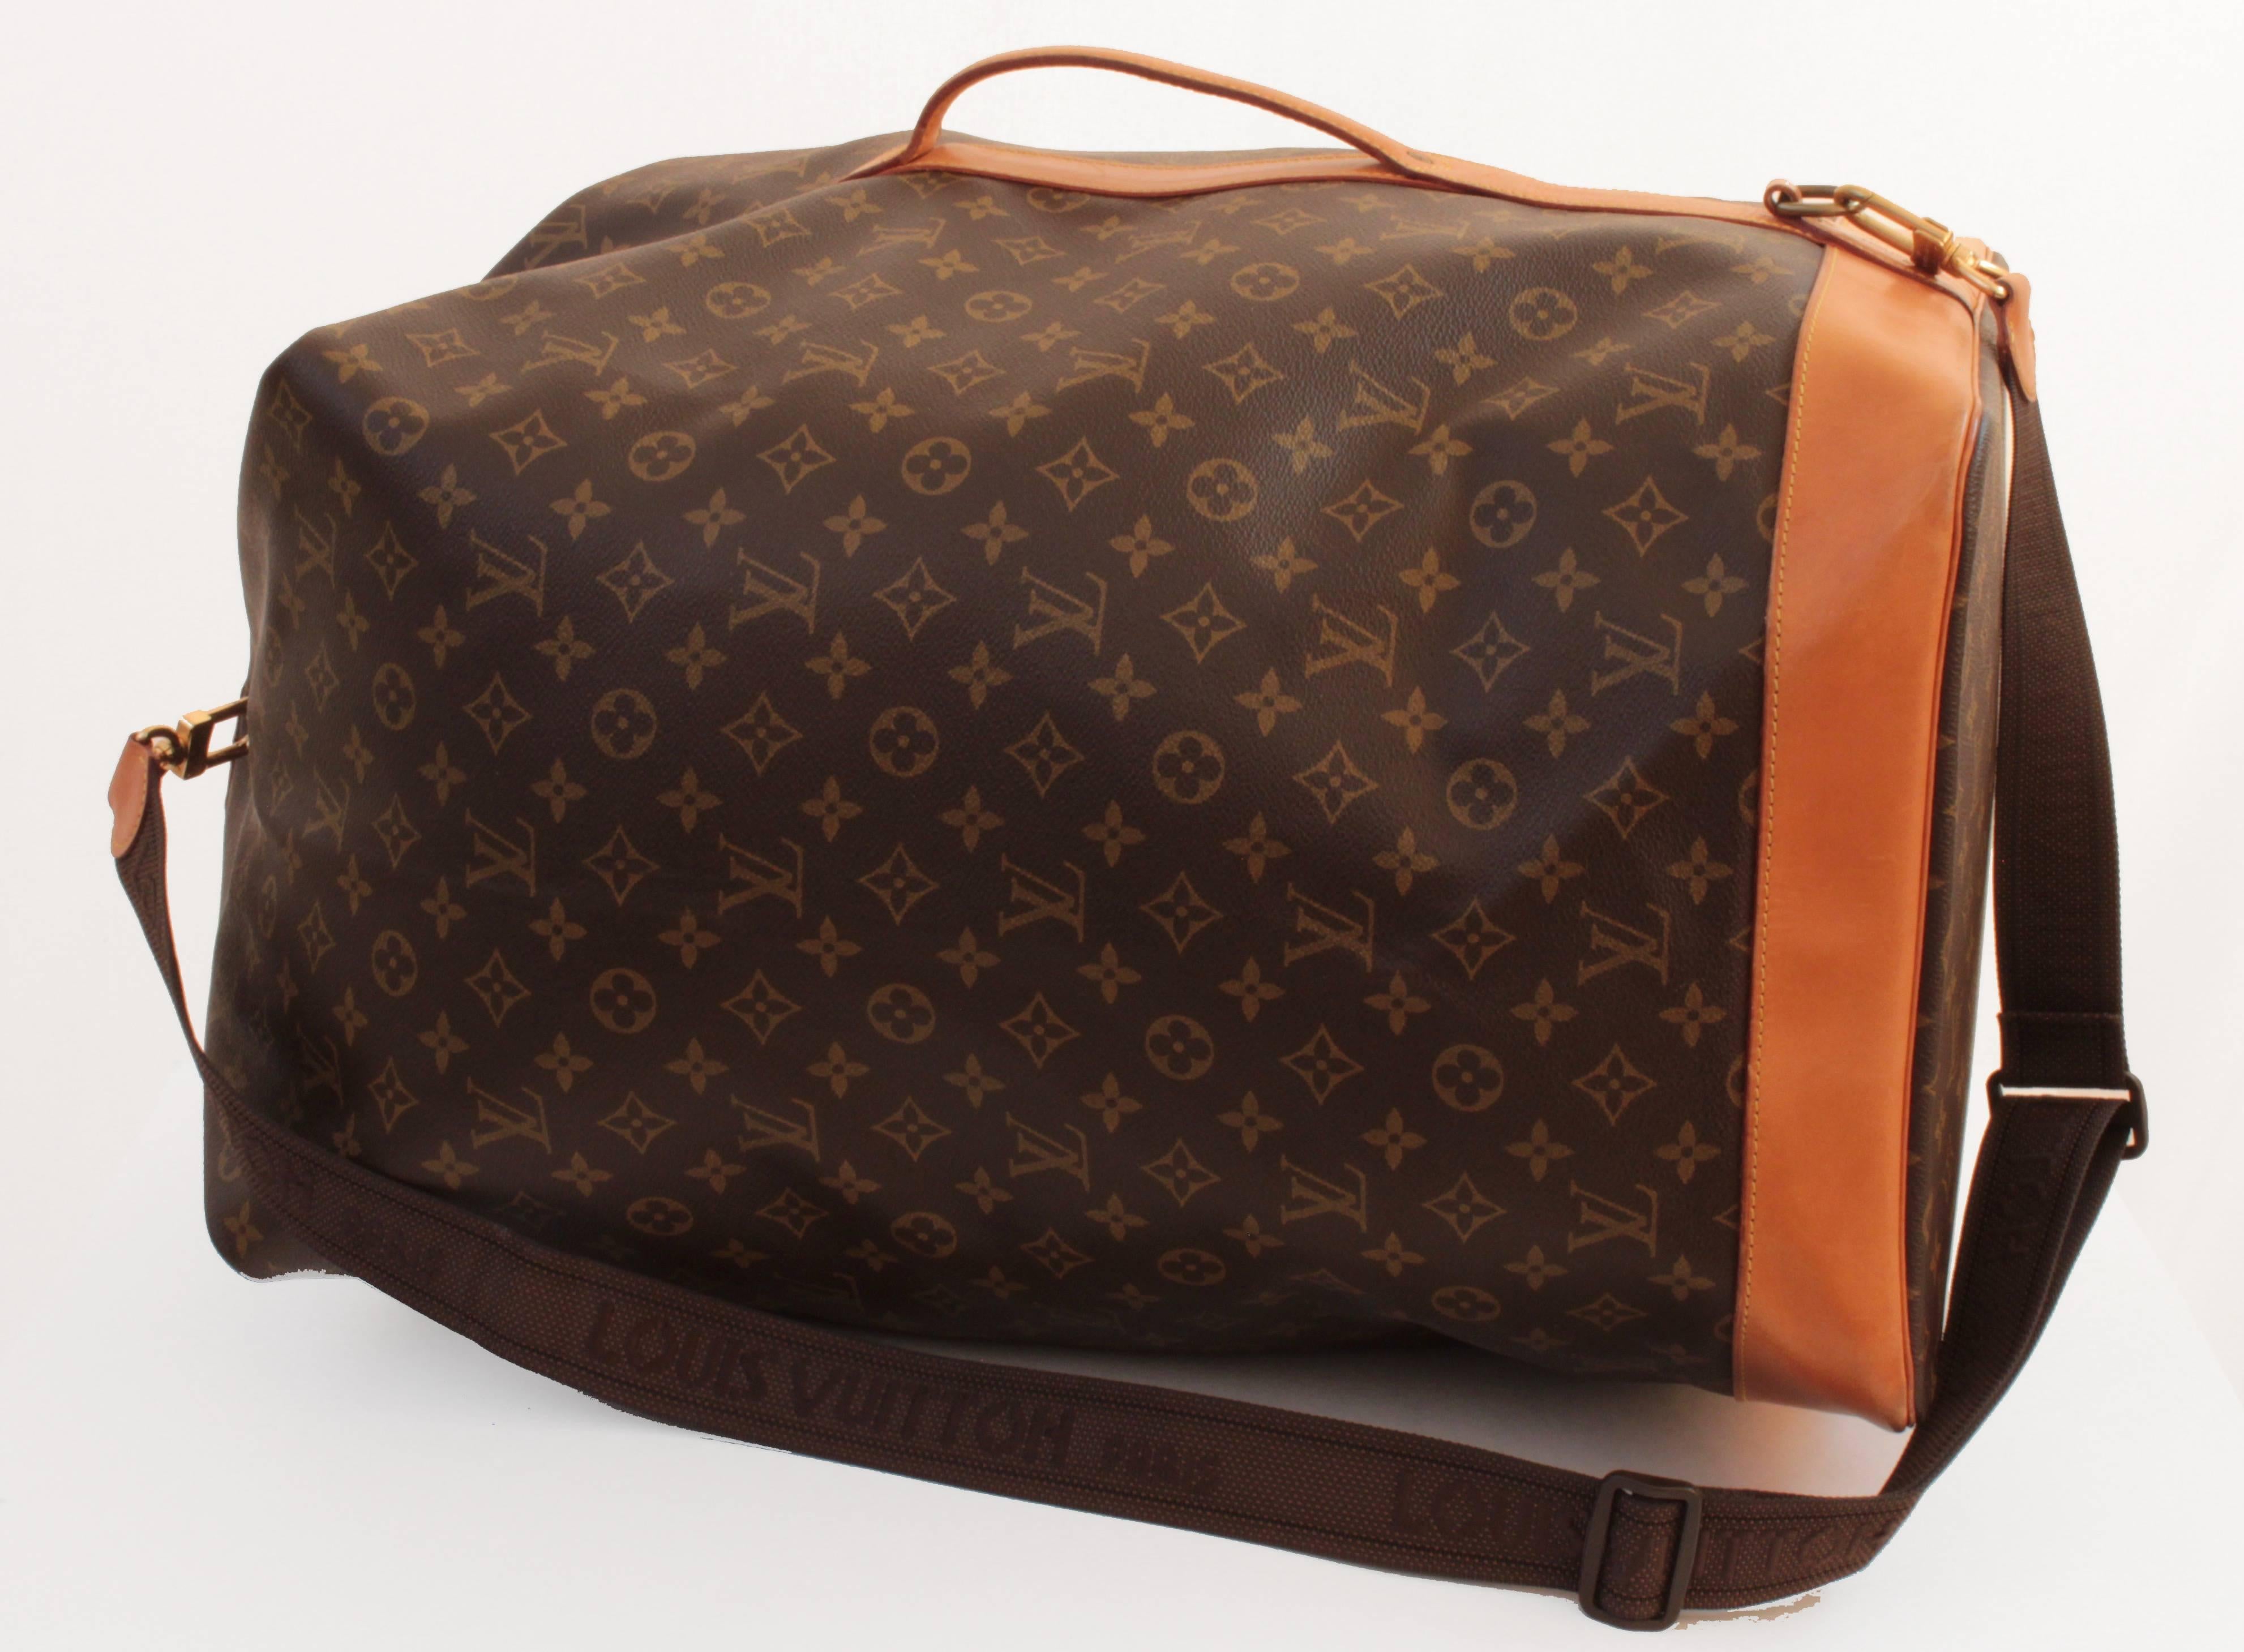 Travel in style with this incredible Louis Vuitton monogram Sac Marin GM with shoulder strap.  Made from LV's signature monogram canvas with vachetta leather trim, this extra-large travel bag holds a ton!  Stamped N00907 indicating a 1997 year of